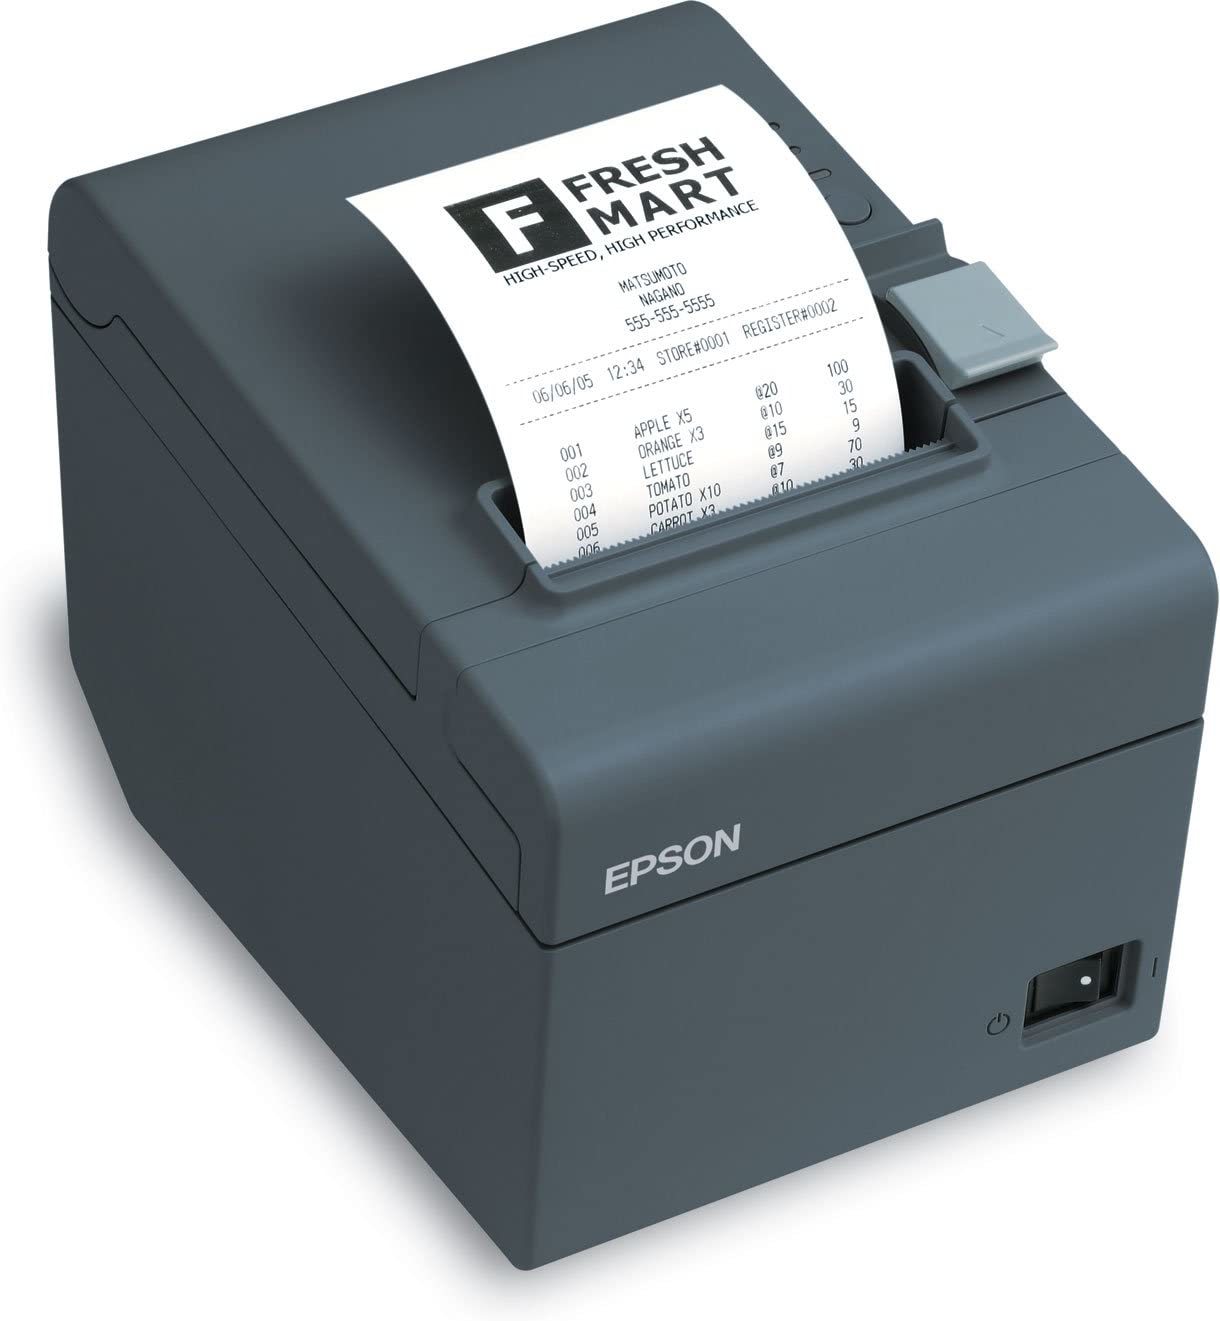 Primary image for Monochrome Desktop Epson Readyprint T20 Direct Thermal Printer With Receipt